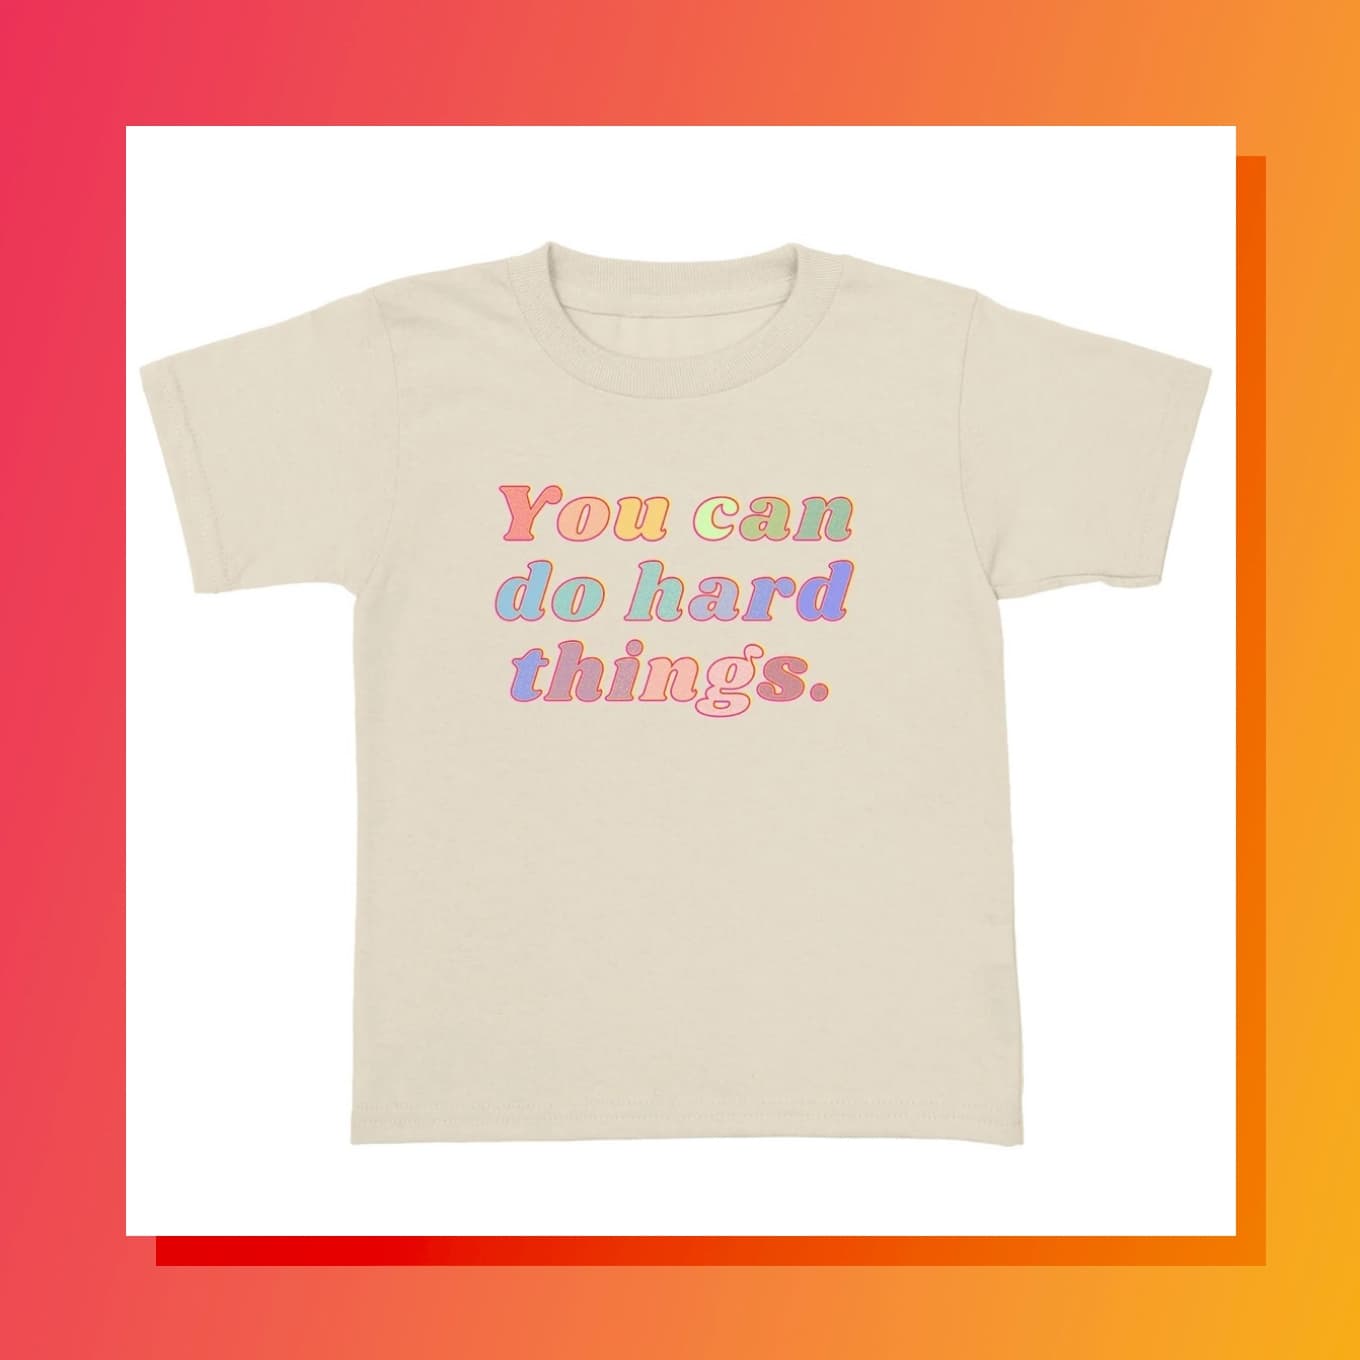 Shirt that says: You can do hard things